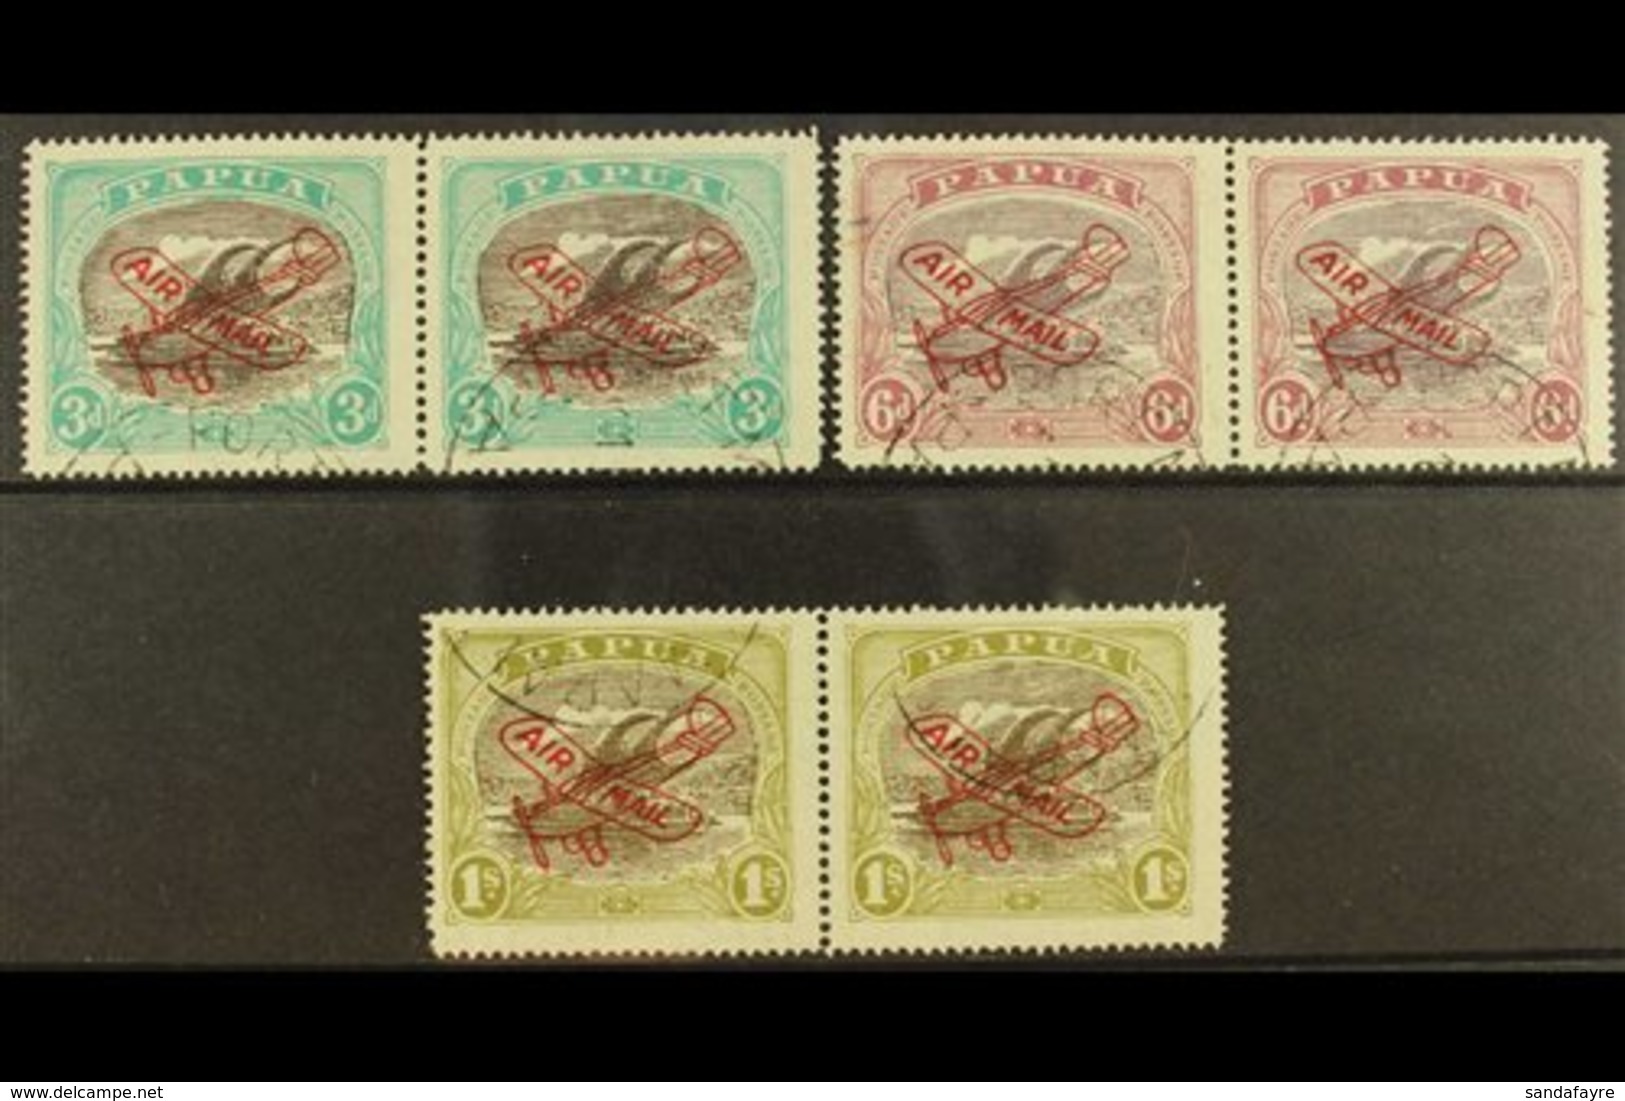 1930  Air Set, Ash Printing, SG 118-120, Each In A Horizontal Pair With One In Each Showing RIFT IN CLOUD, Fine Cds Used - Papoea-Nieuw-Guinea